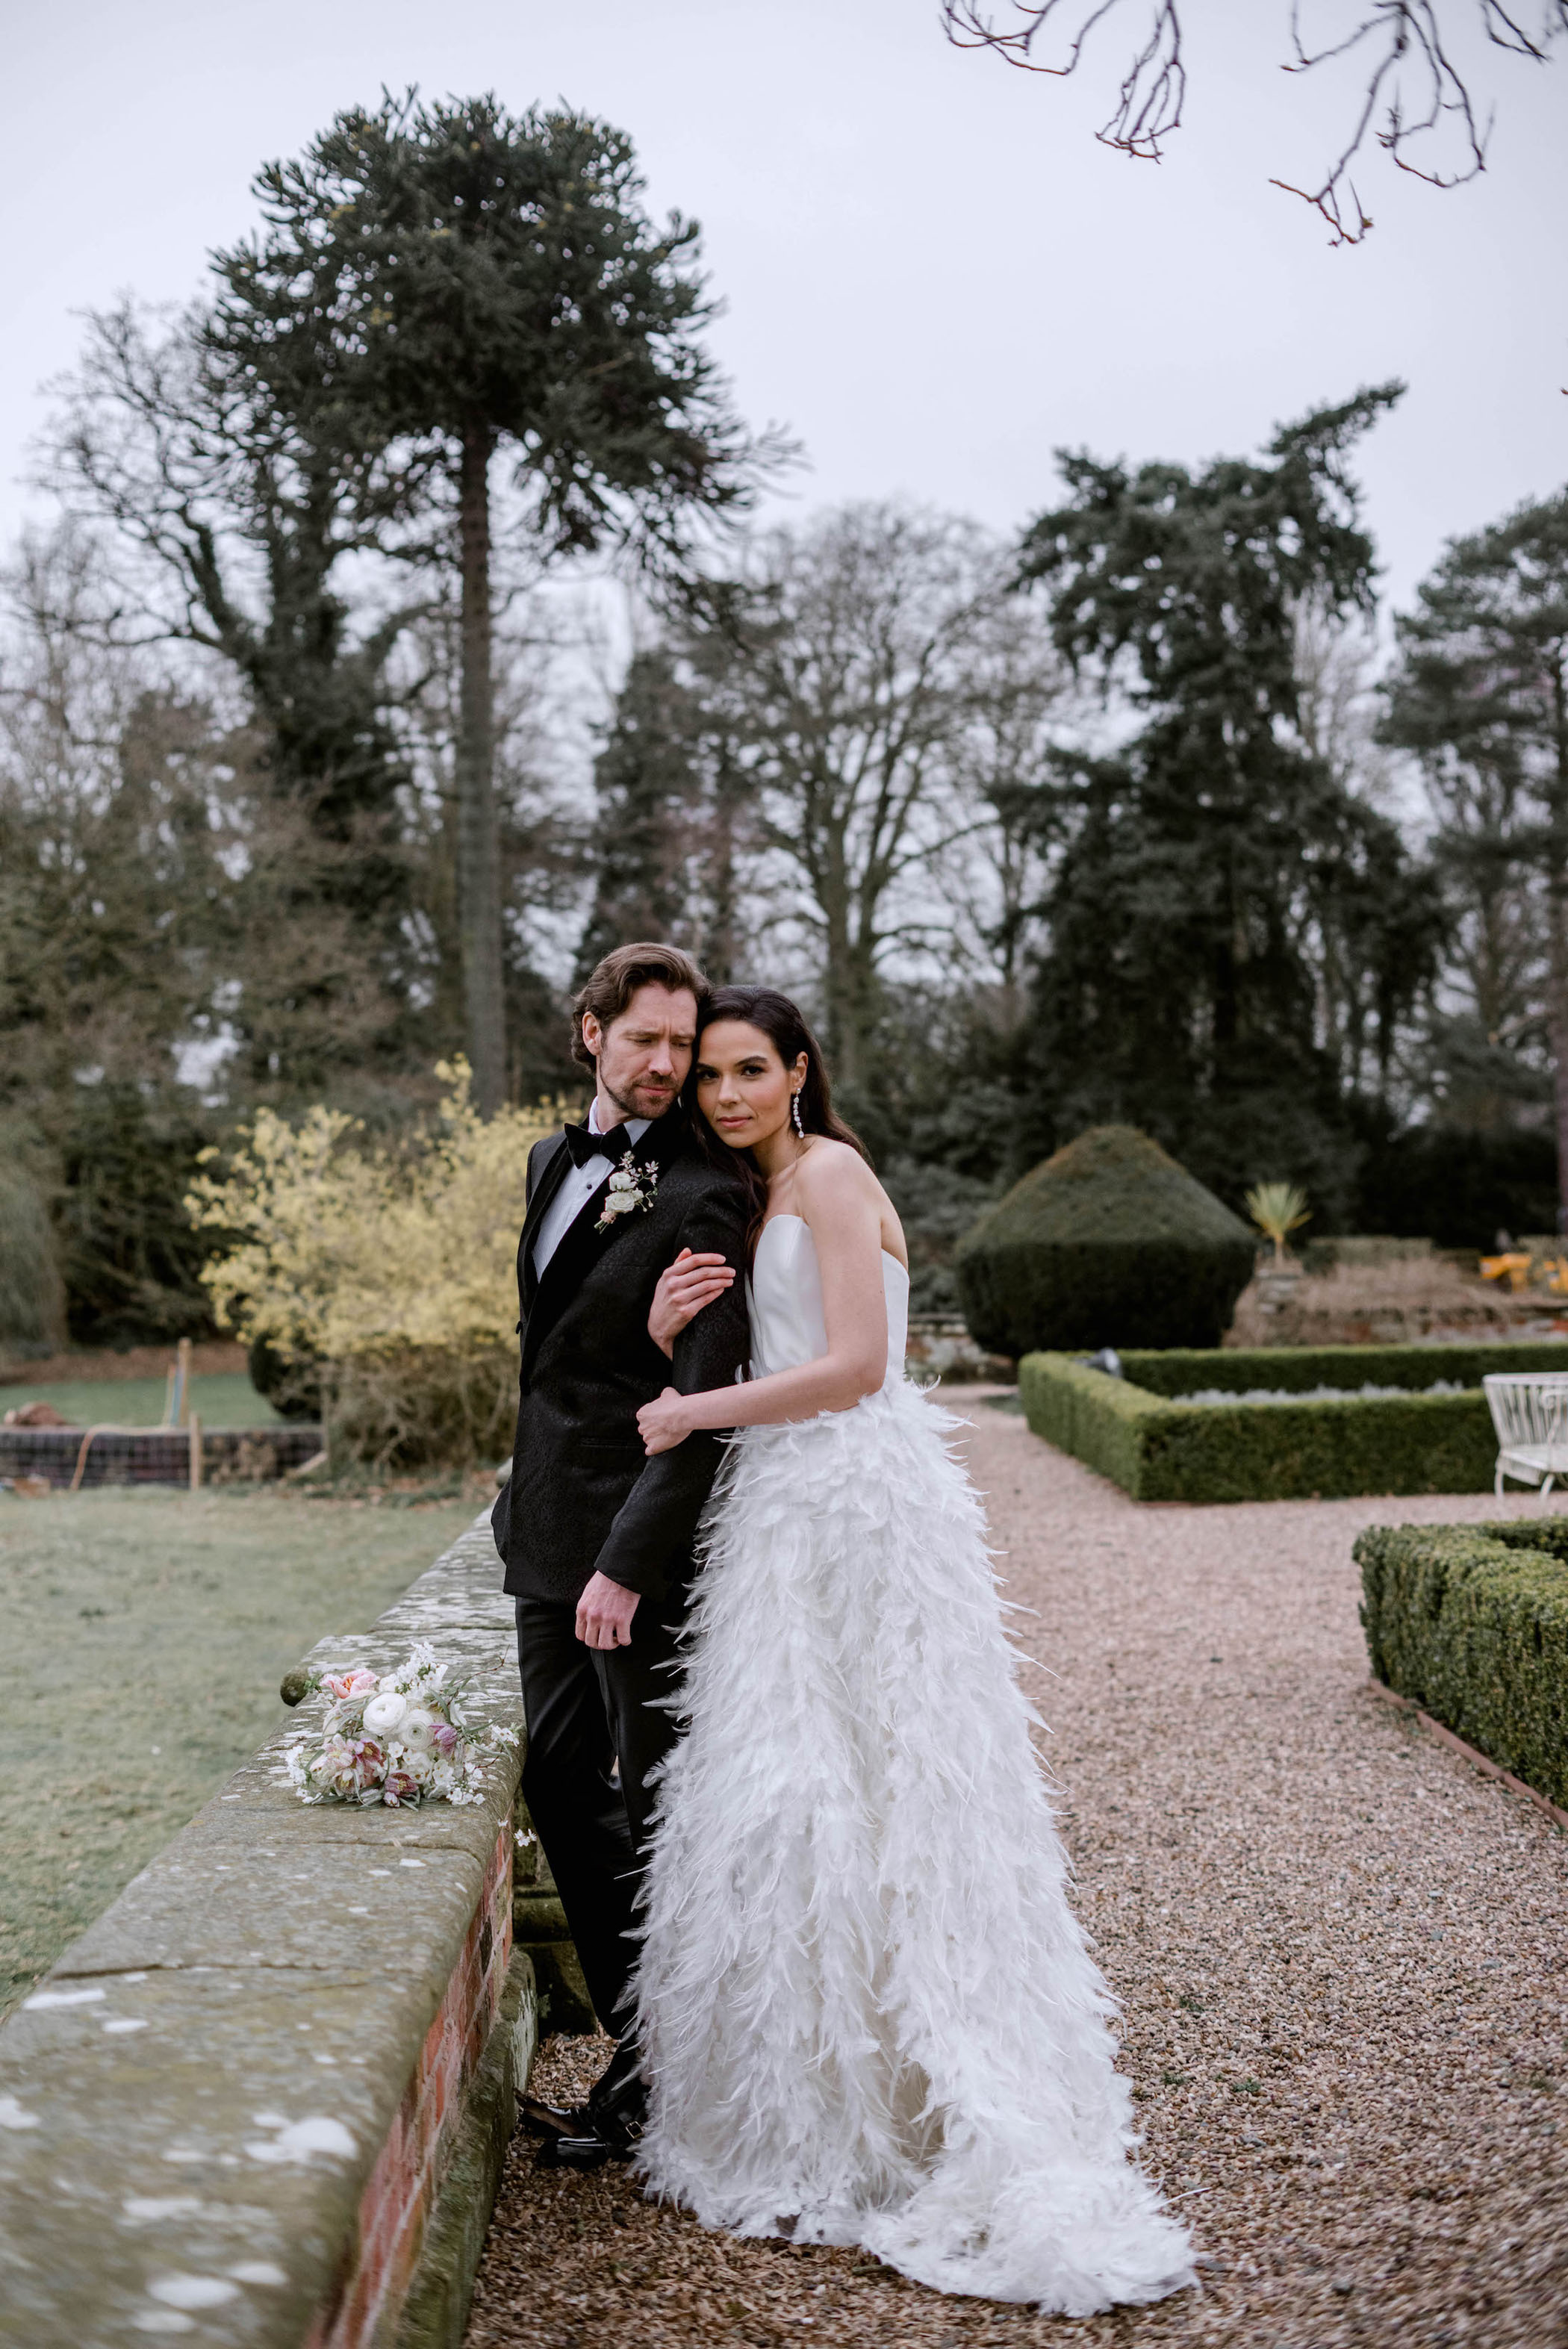 Timeless English Wedding Inspiration with Feather Details + Home-Grown Flowers